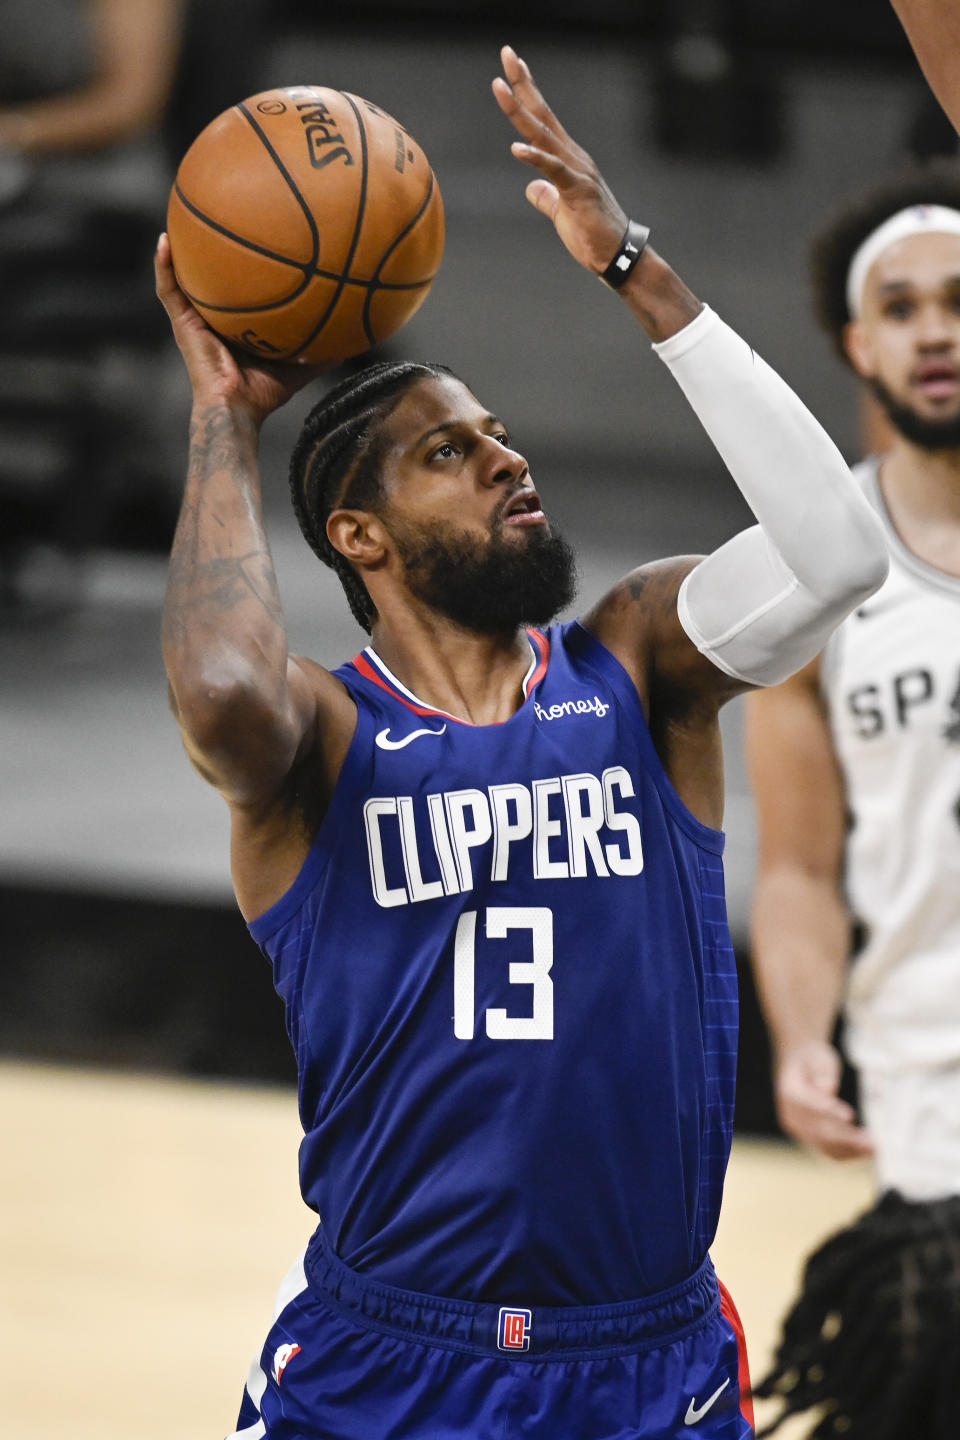 Los Angeles Clippers' Paul George shoots during the second half of an NBA basketball game against the San Antonio Spurs on Wednesday, March 24, 2021, in San Antonio. Los Angeles won 134-101. (AP Photo/Darren Abate)